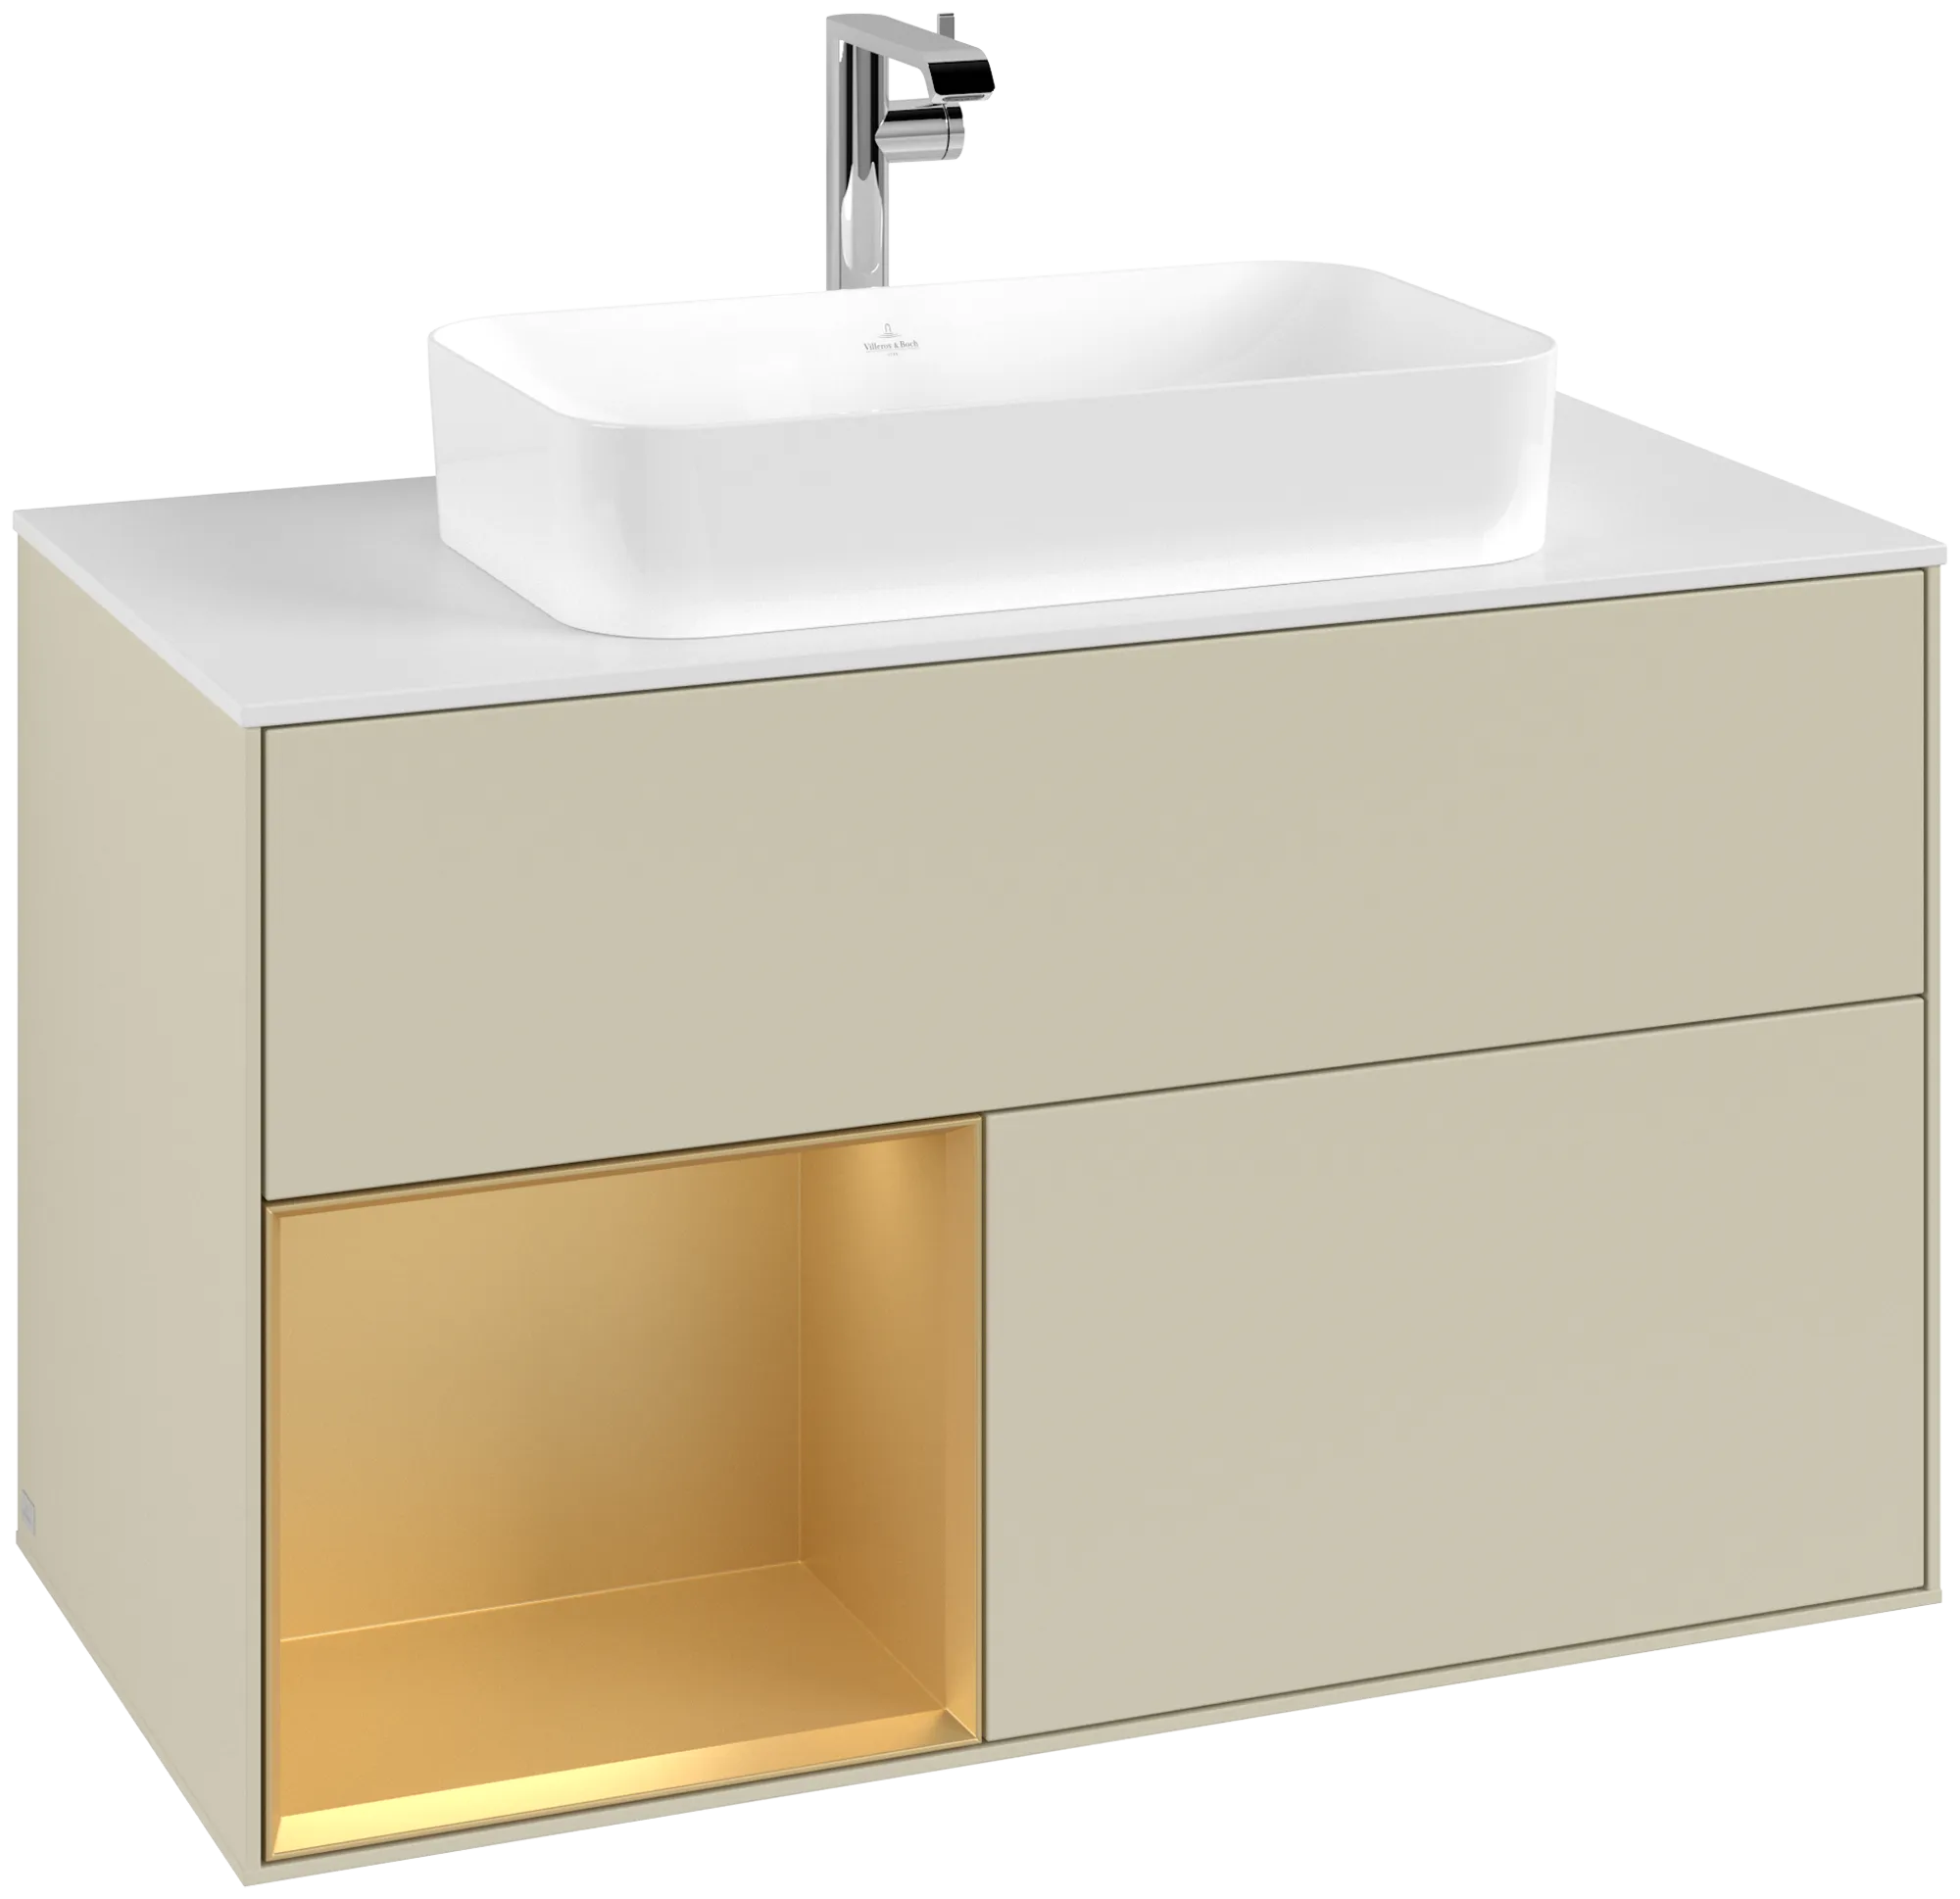 Picture of VILLEROY BOCH Finion Vanity unit, with lighting, 2 pull-out compartments, 1000 x 603 x 501 mm, Silk Grey Matt Lacquer / Gold Matt Lacquer / Glass White Matt #G241HFHJ